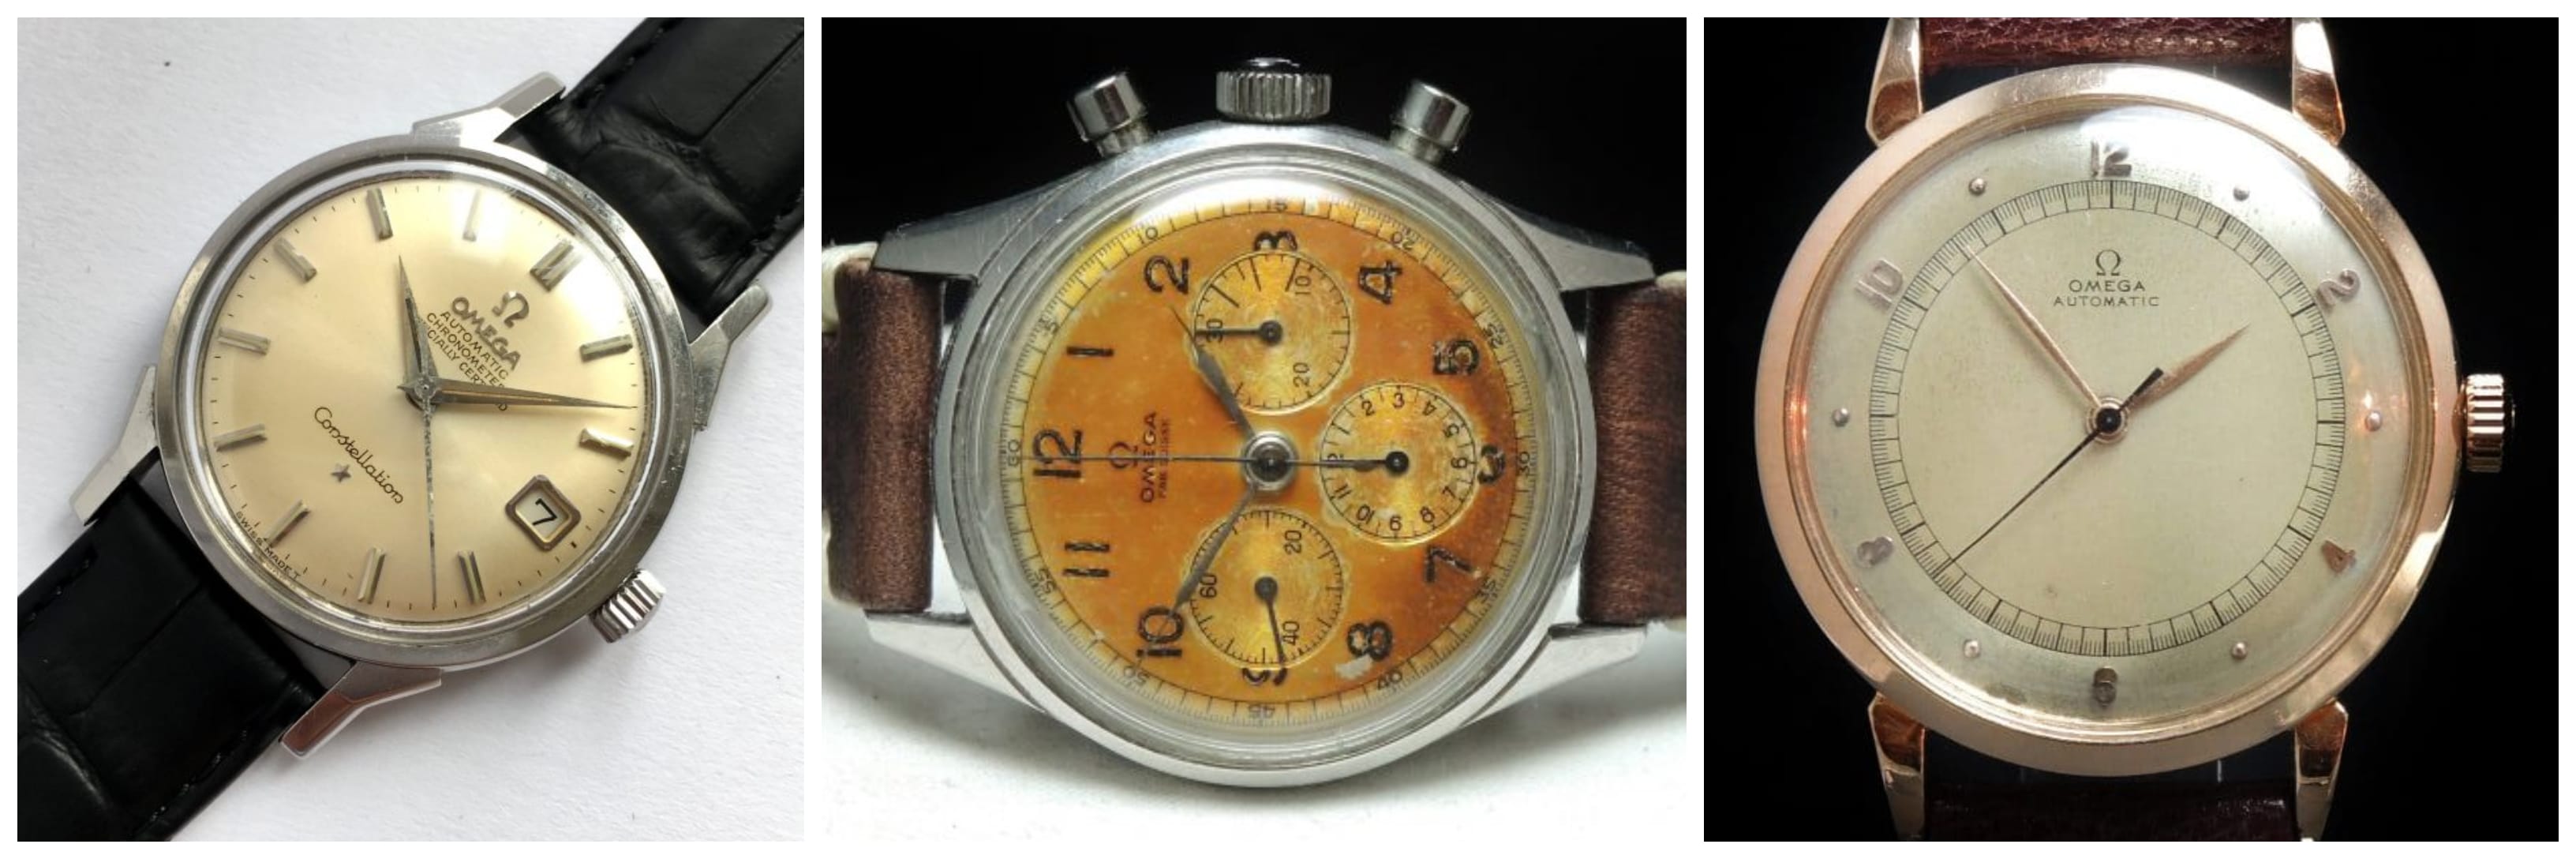 The Four Biggest Mistakes When Buying Vintage Watches